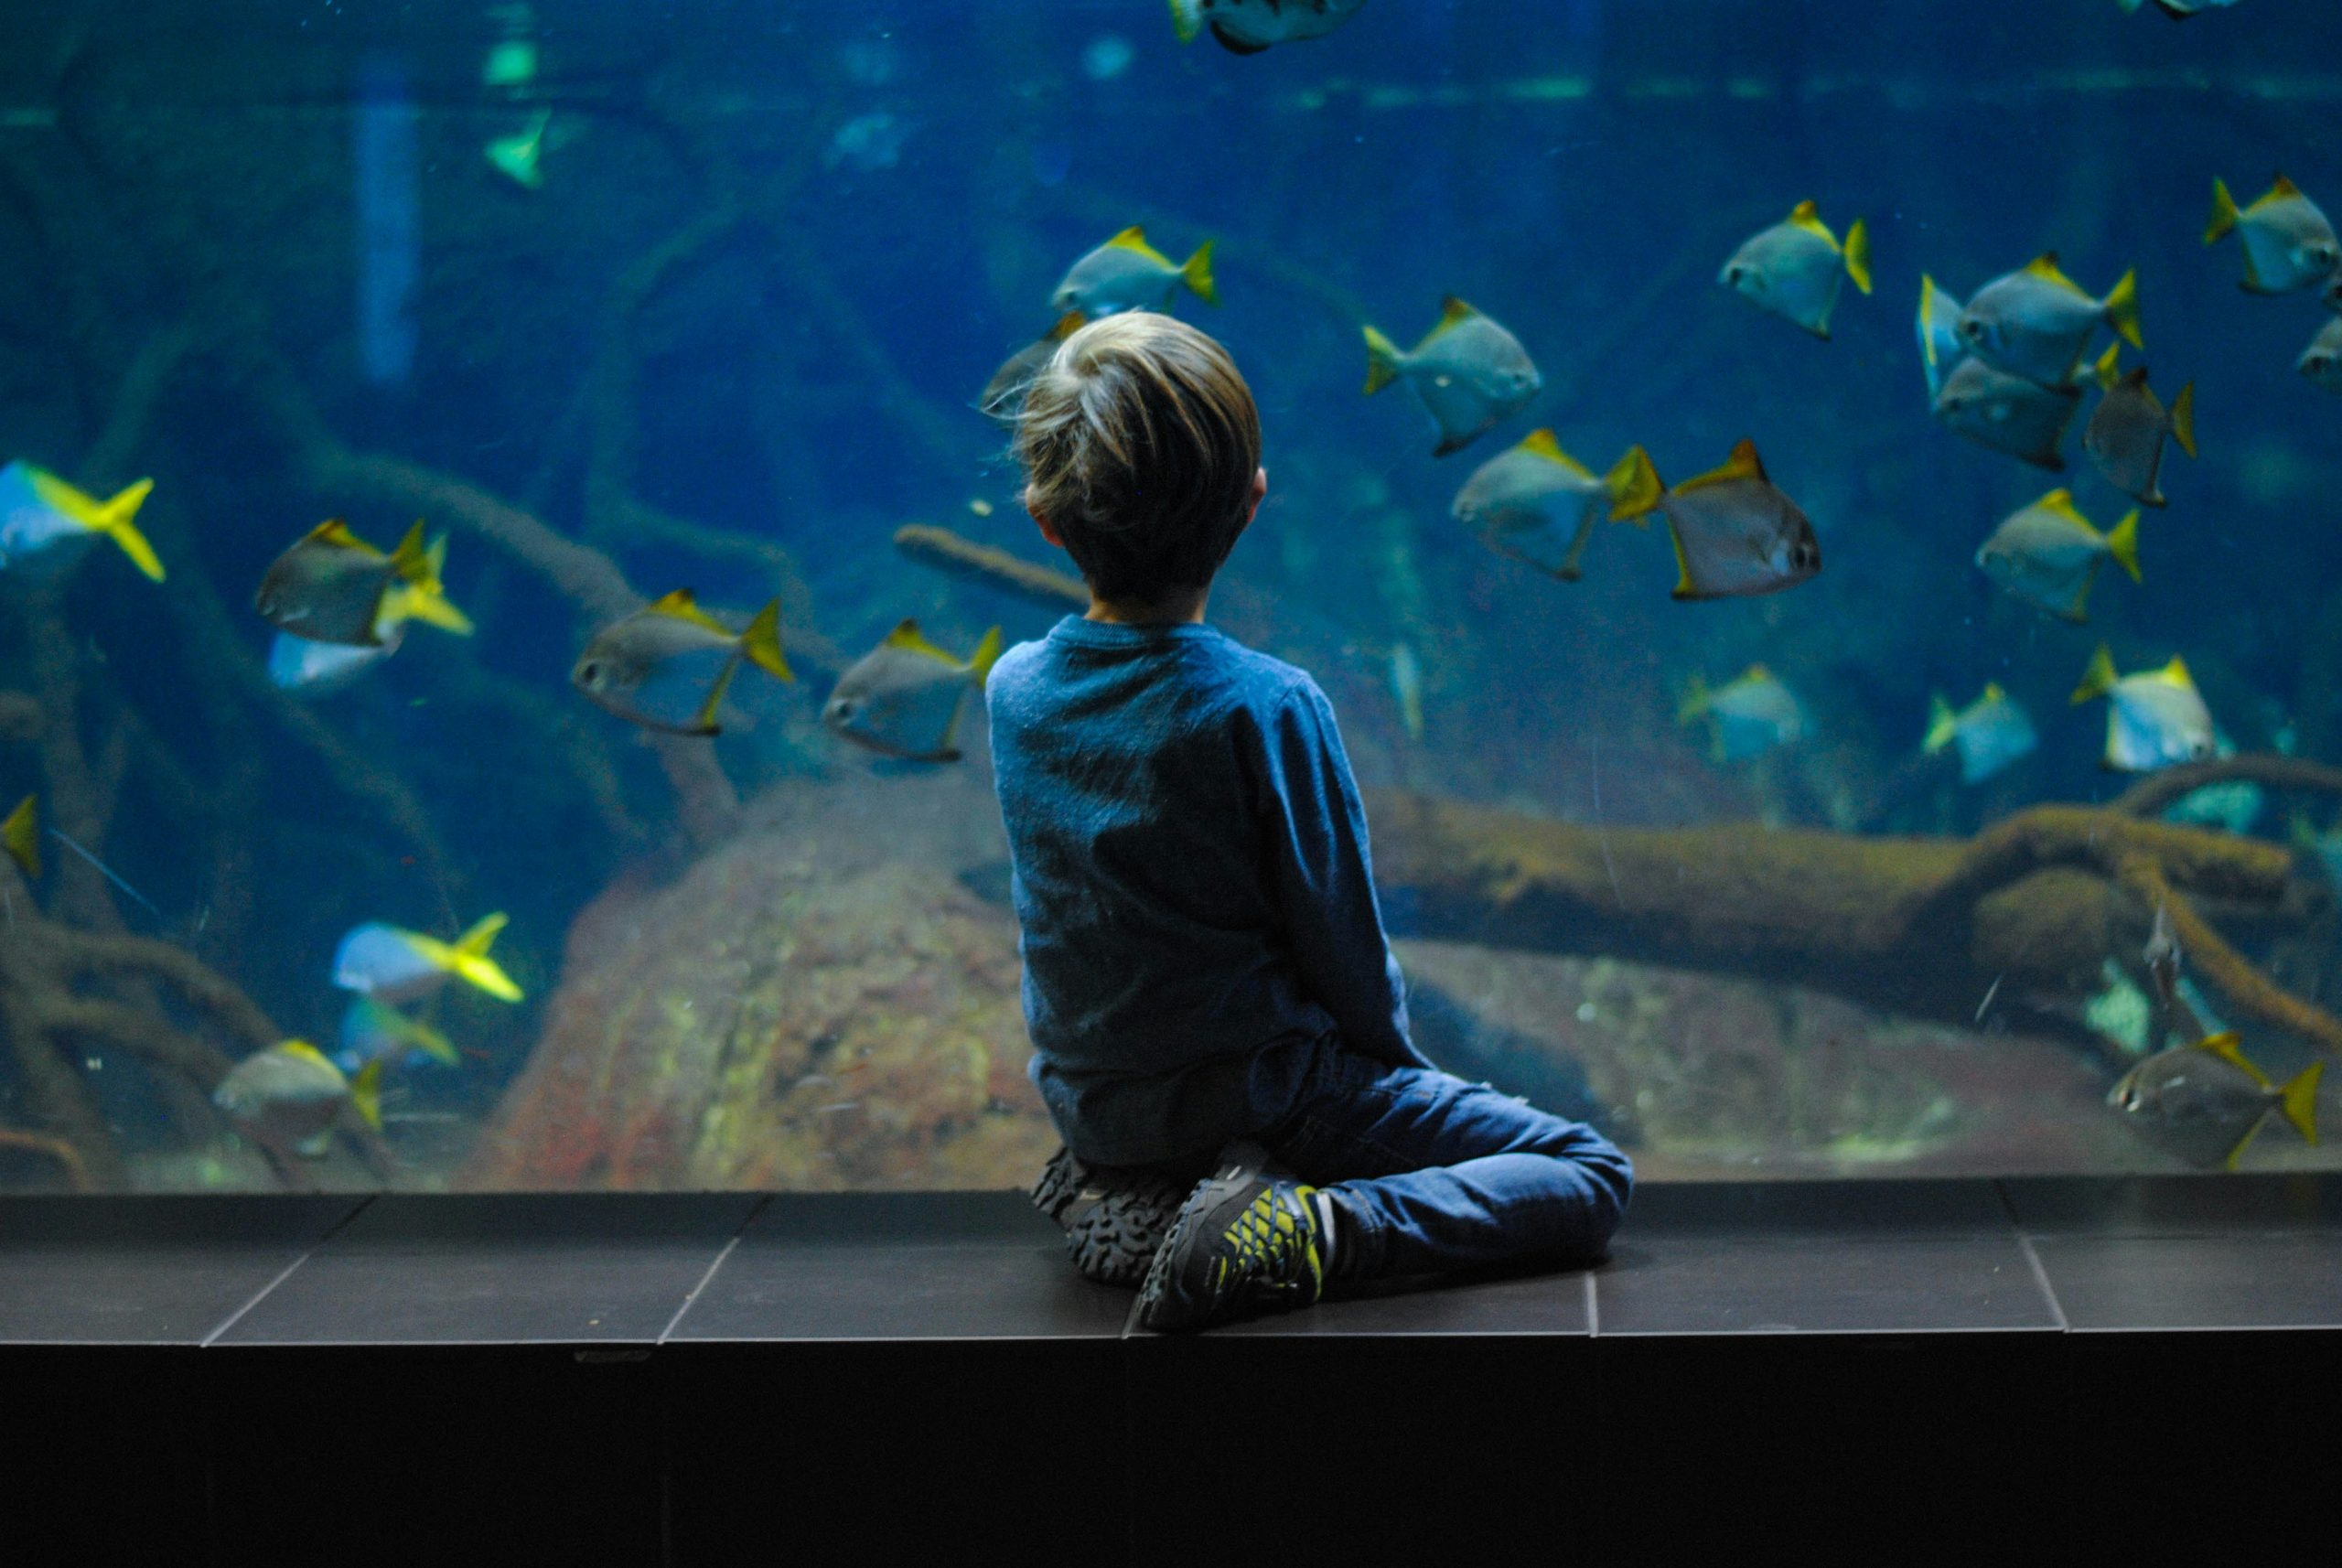 A young boy watching the school of fish swimming inside a large tank in the aquarium